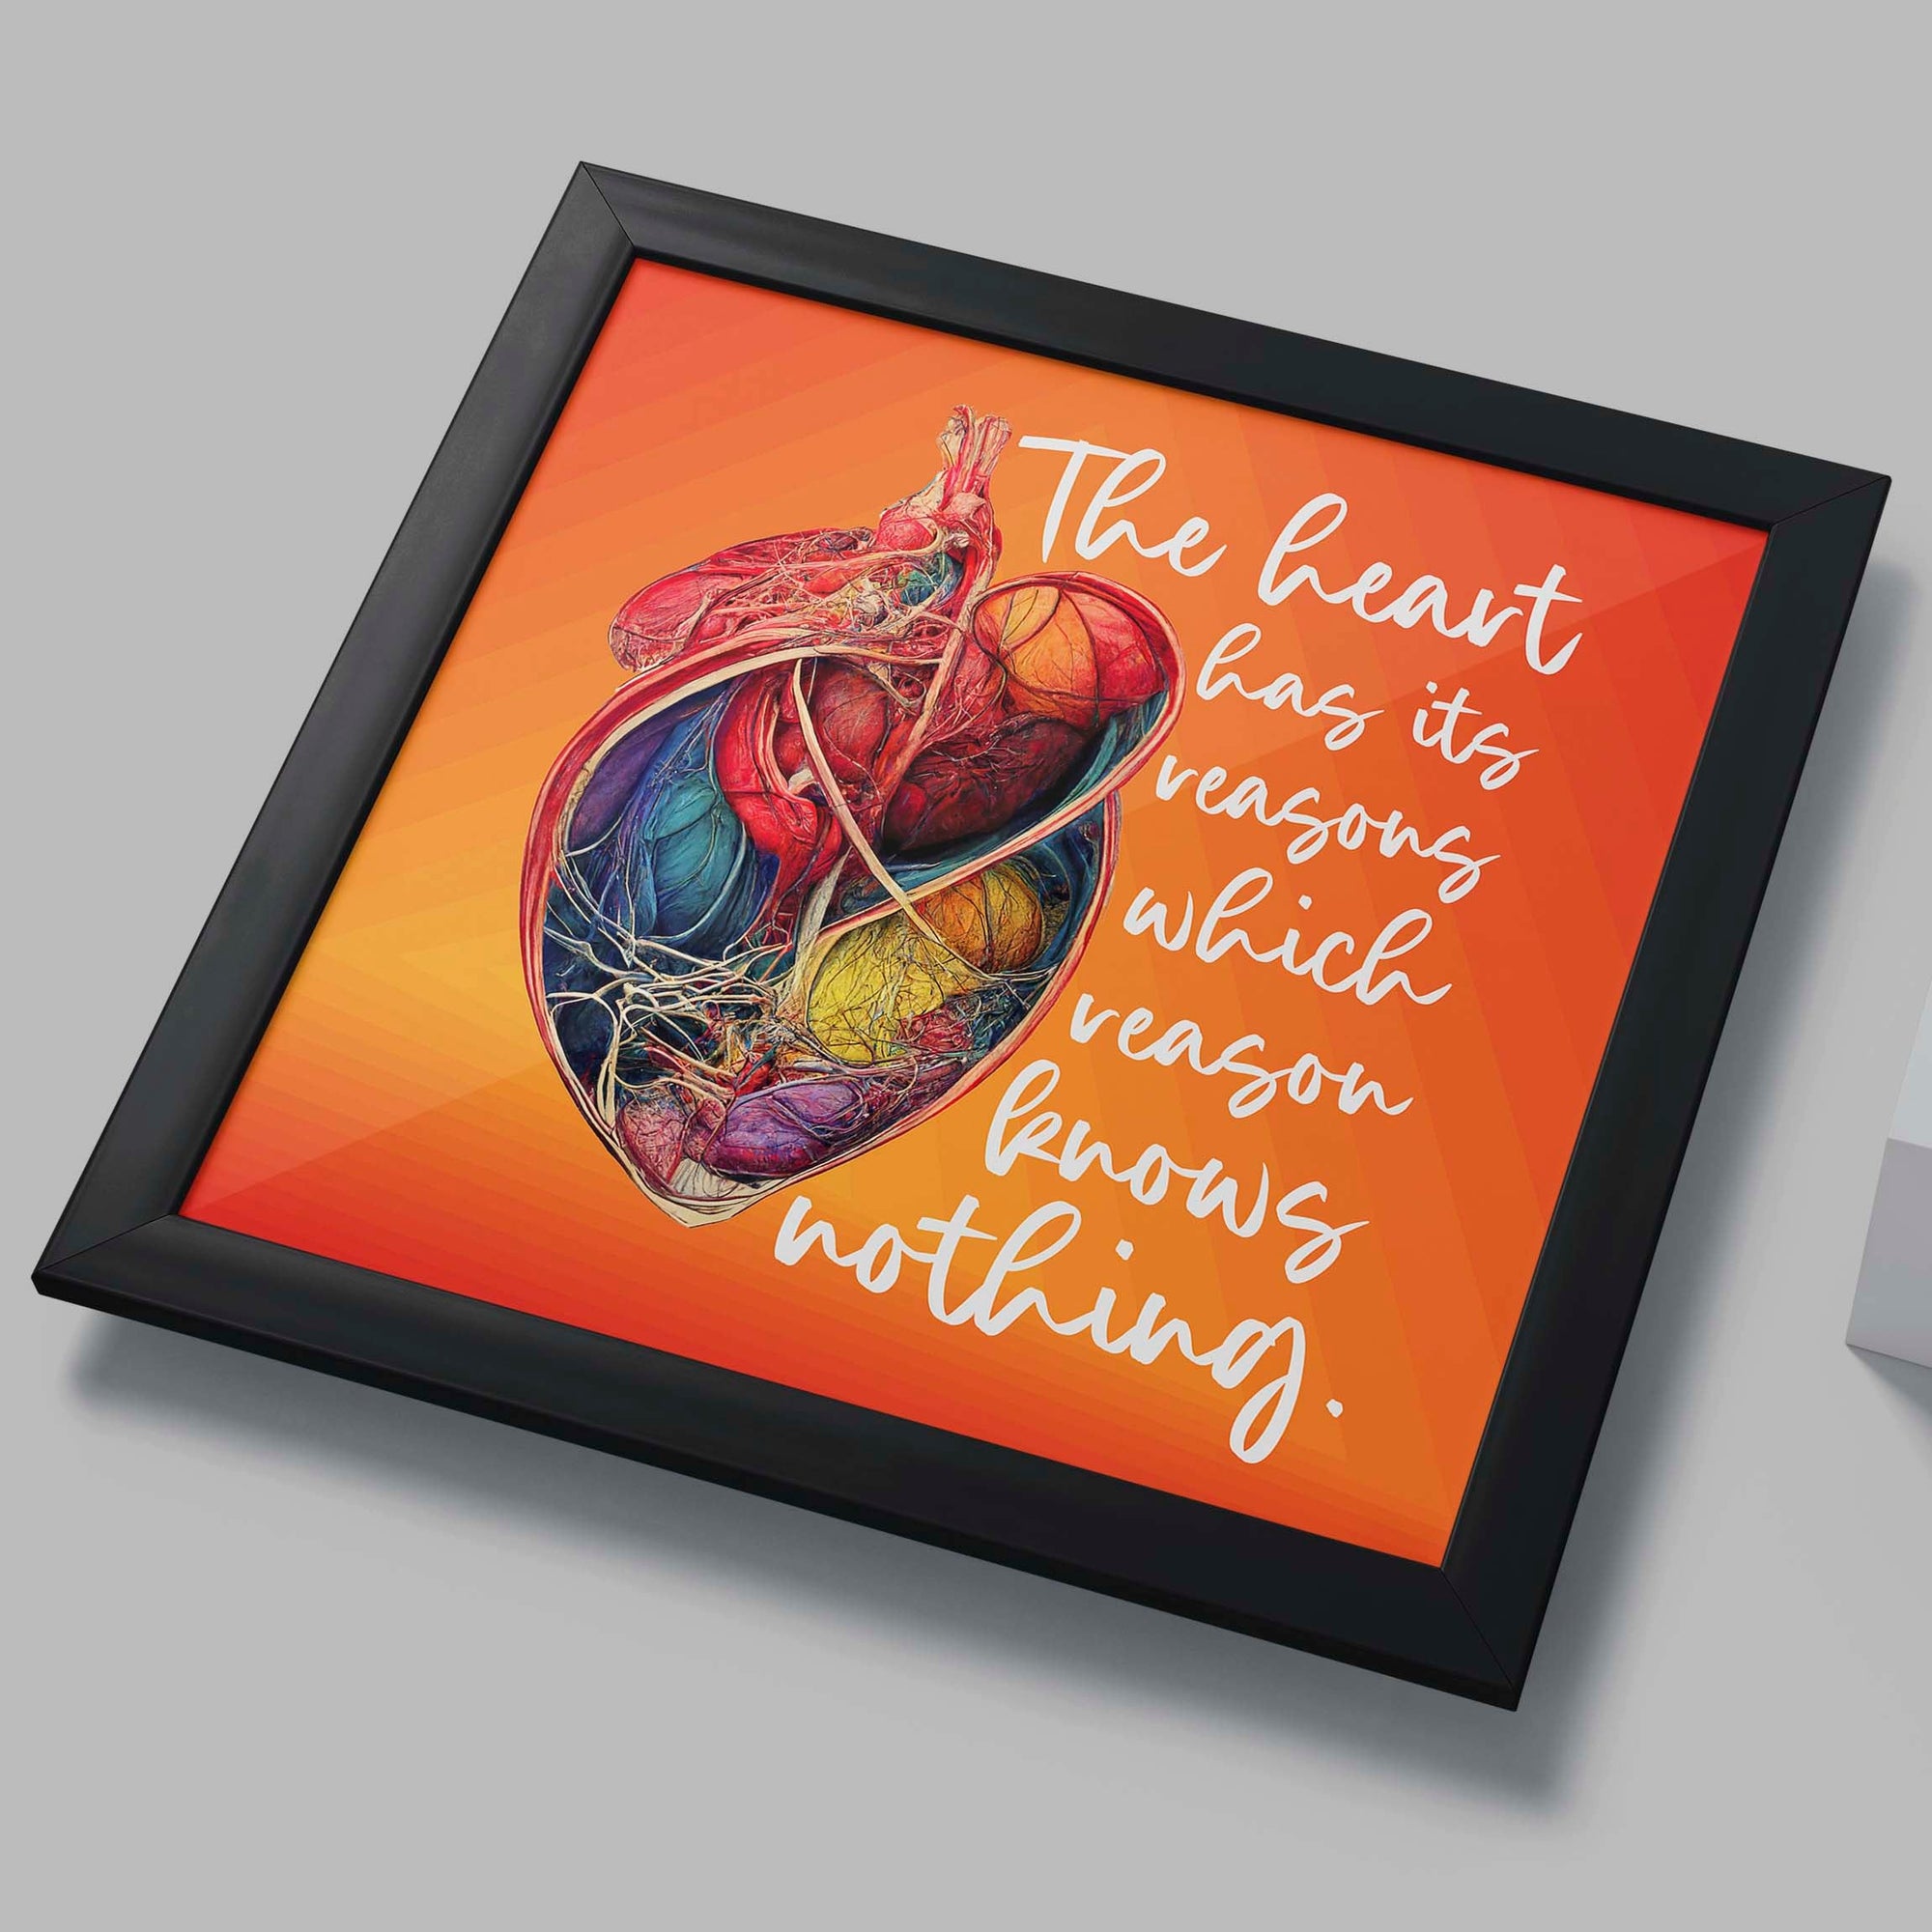 Heart Reasons - Framed Poster For Clinics, Hospitals &amp; Study Spaces